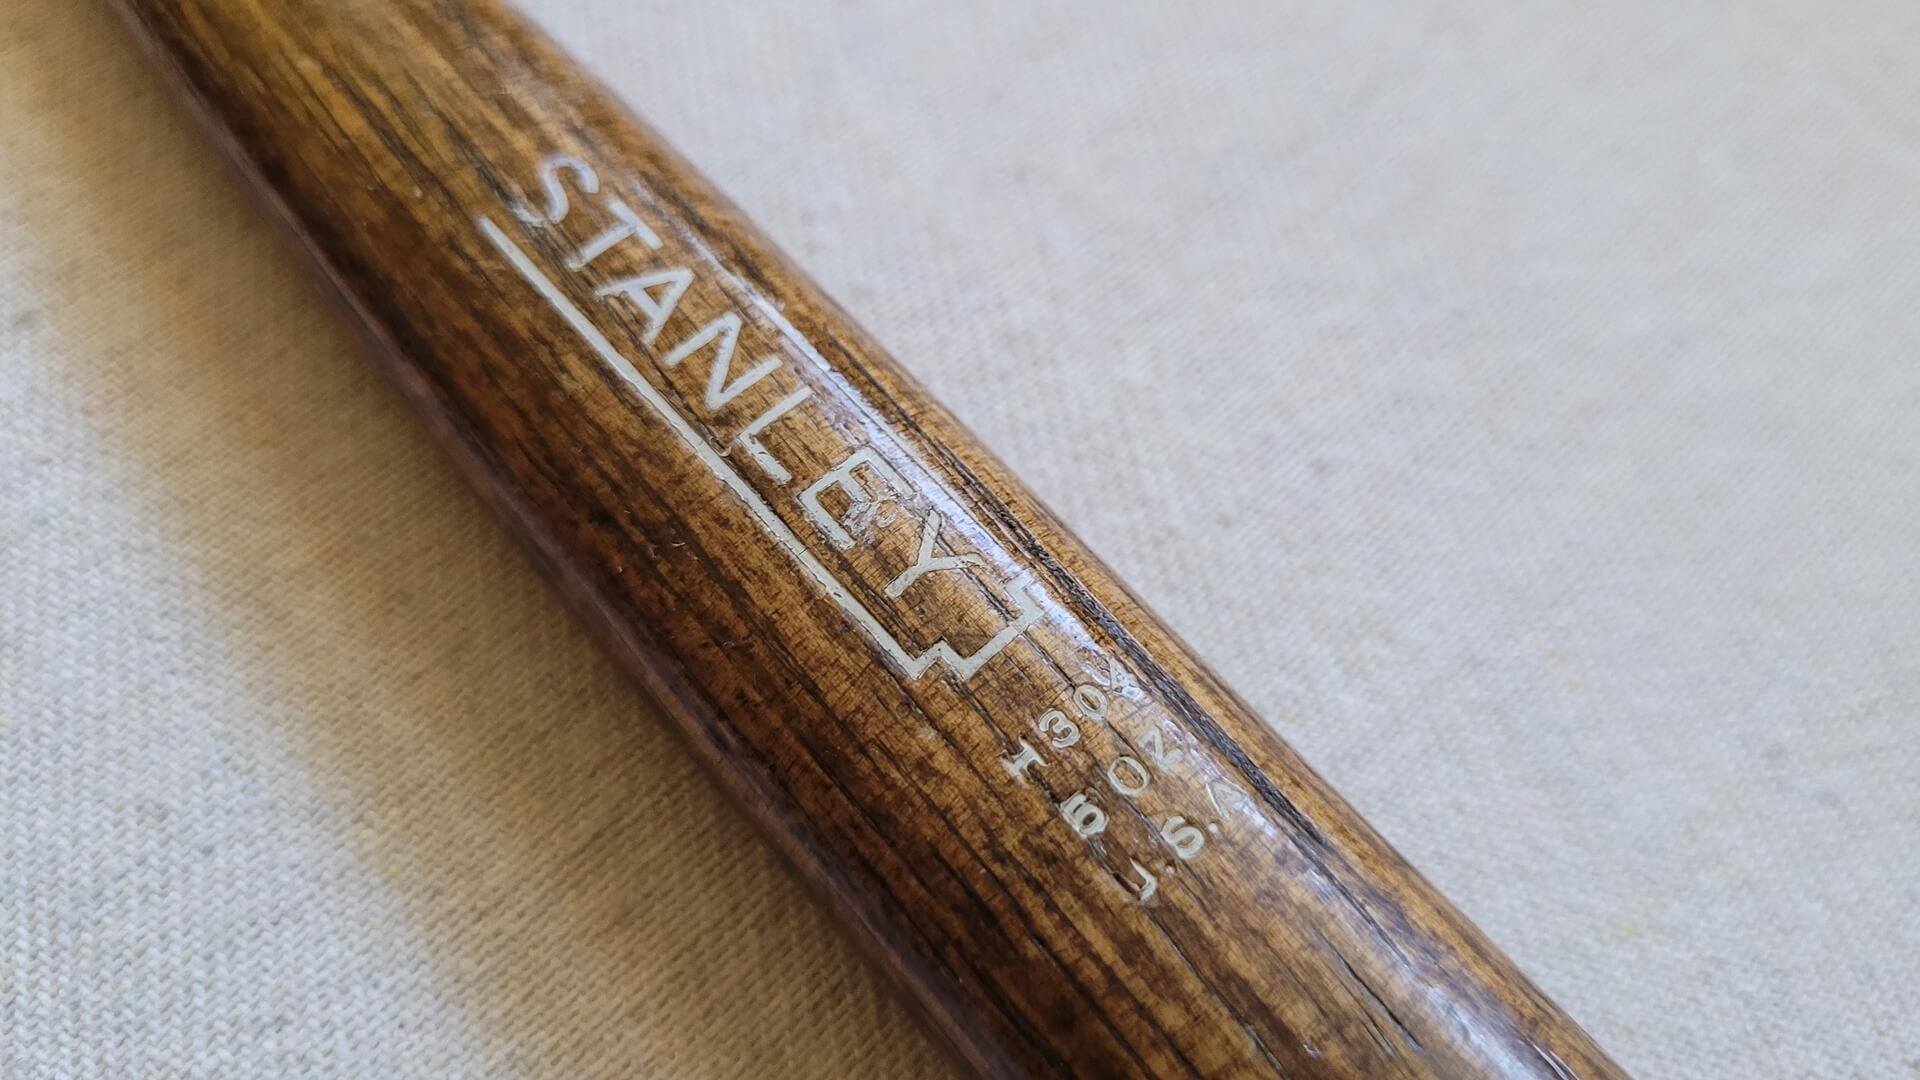 stanley-h304-upholstery-tack-hammer-60z-wooden-handle-antique-vintage-made-in-usa-collectible-hand-tools-makers-brand-logo-engraving